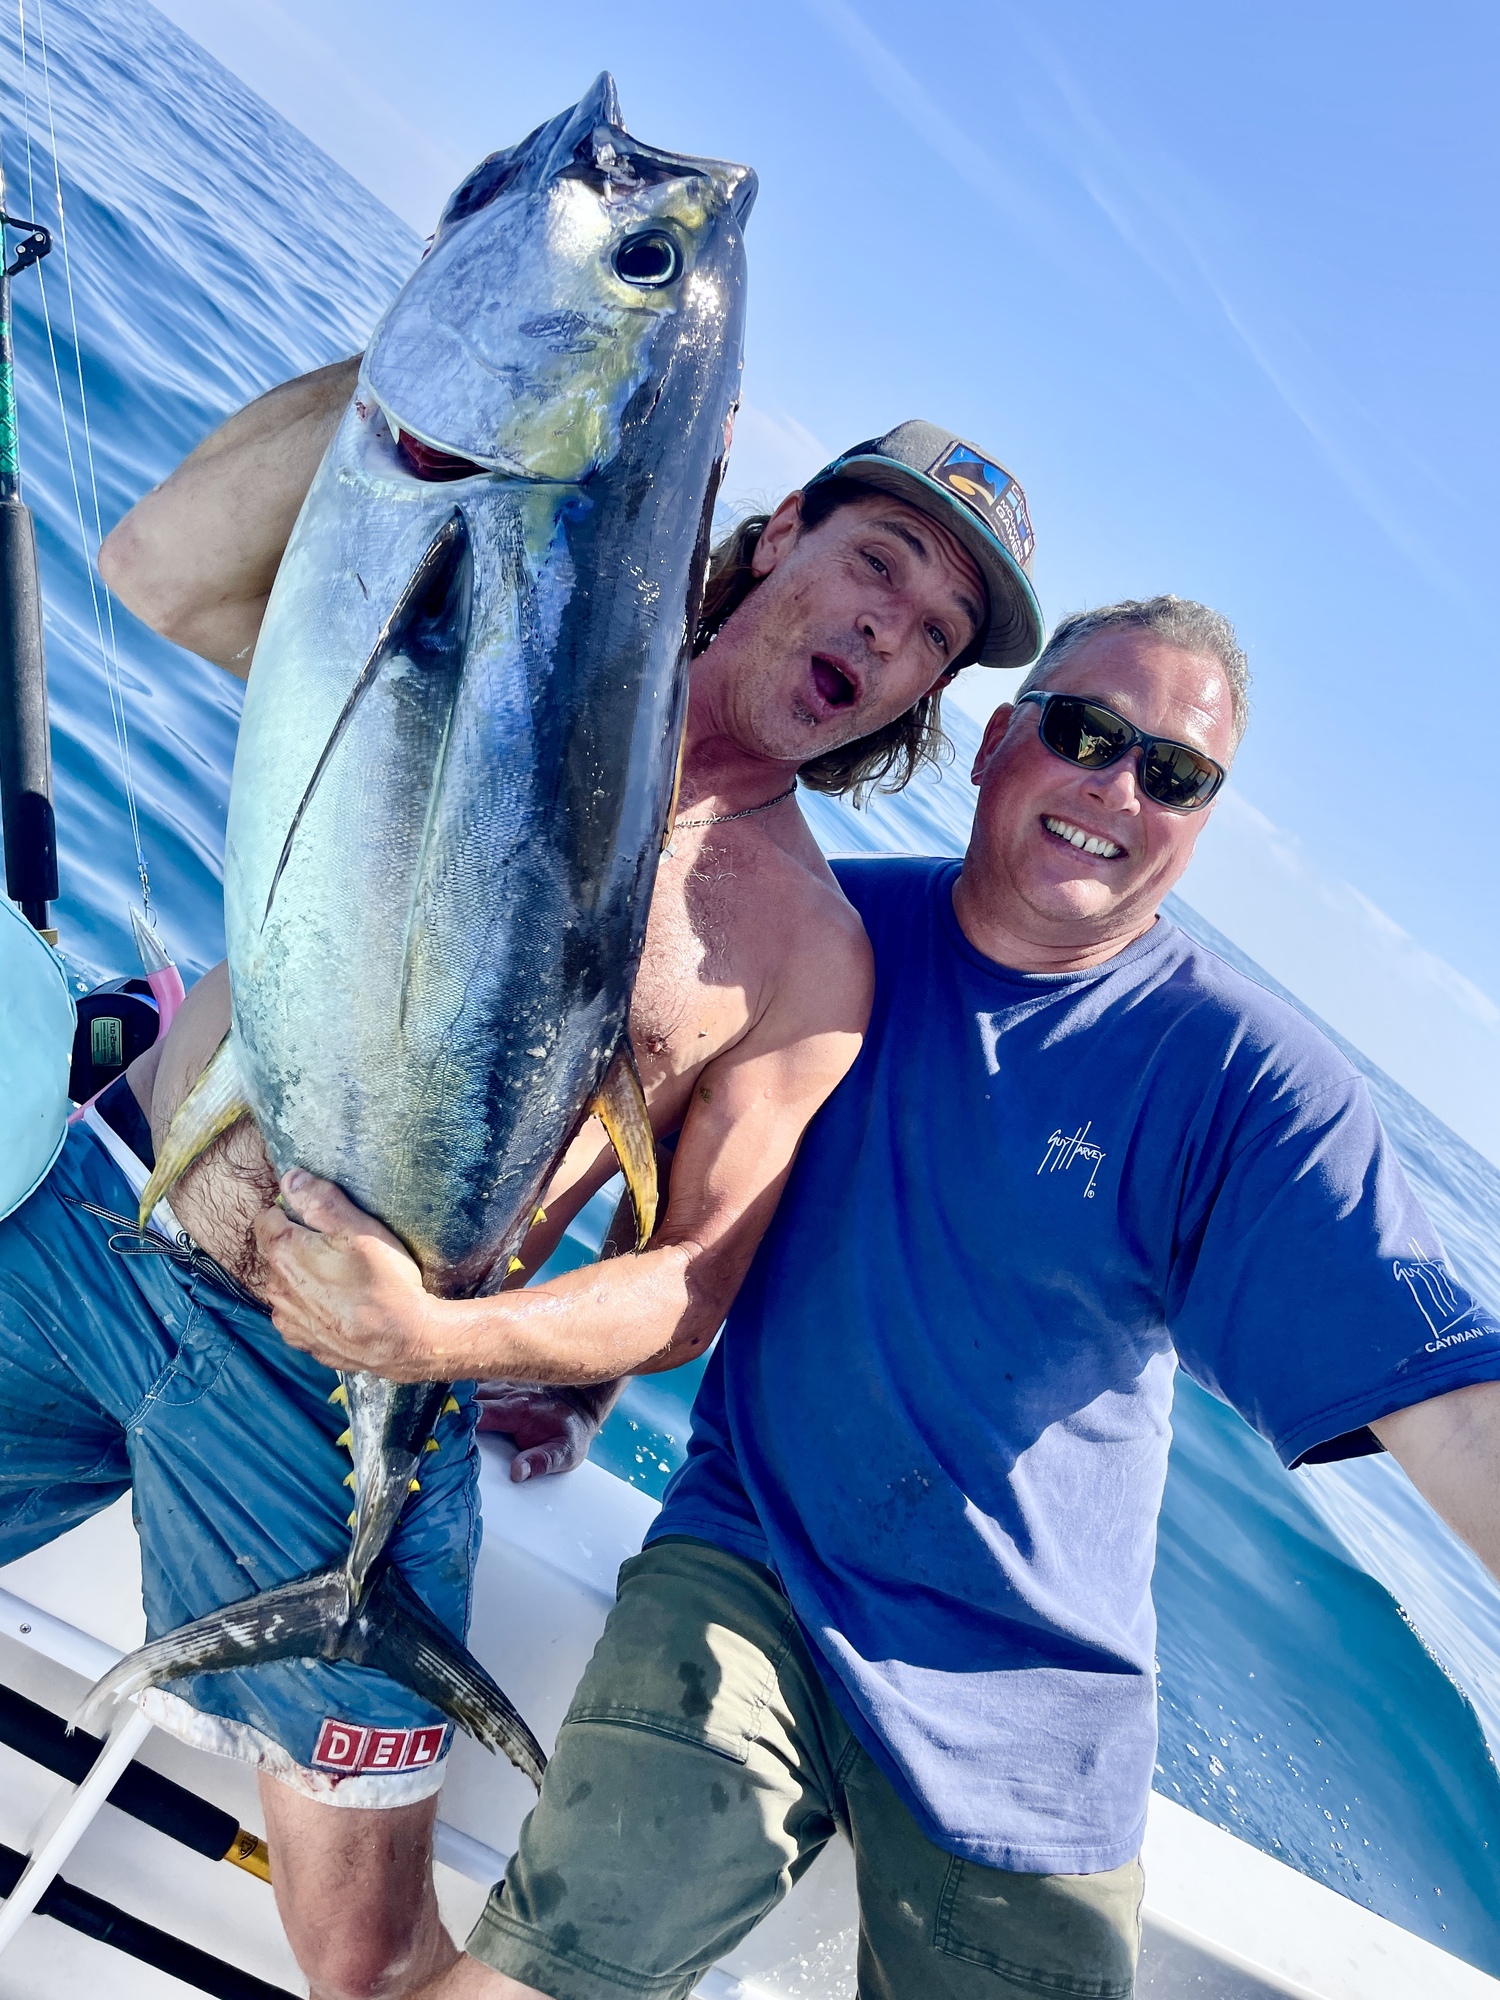 Jay Dell and Keith Robertson were in a celebratory mood after landing this fat yellowfin tuna recently.